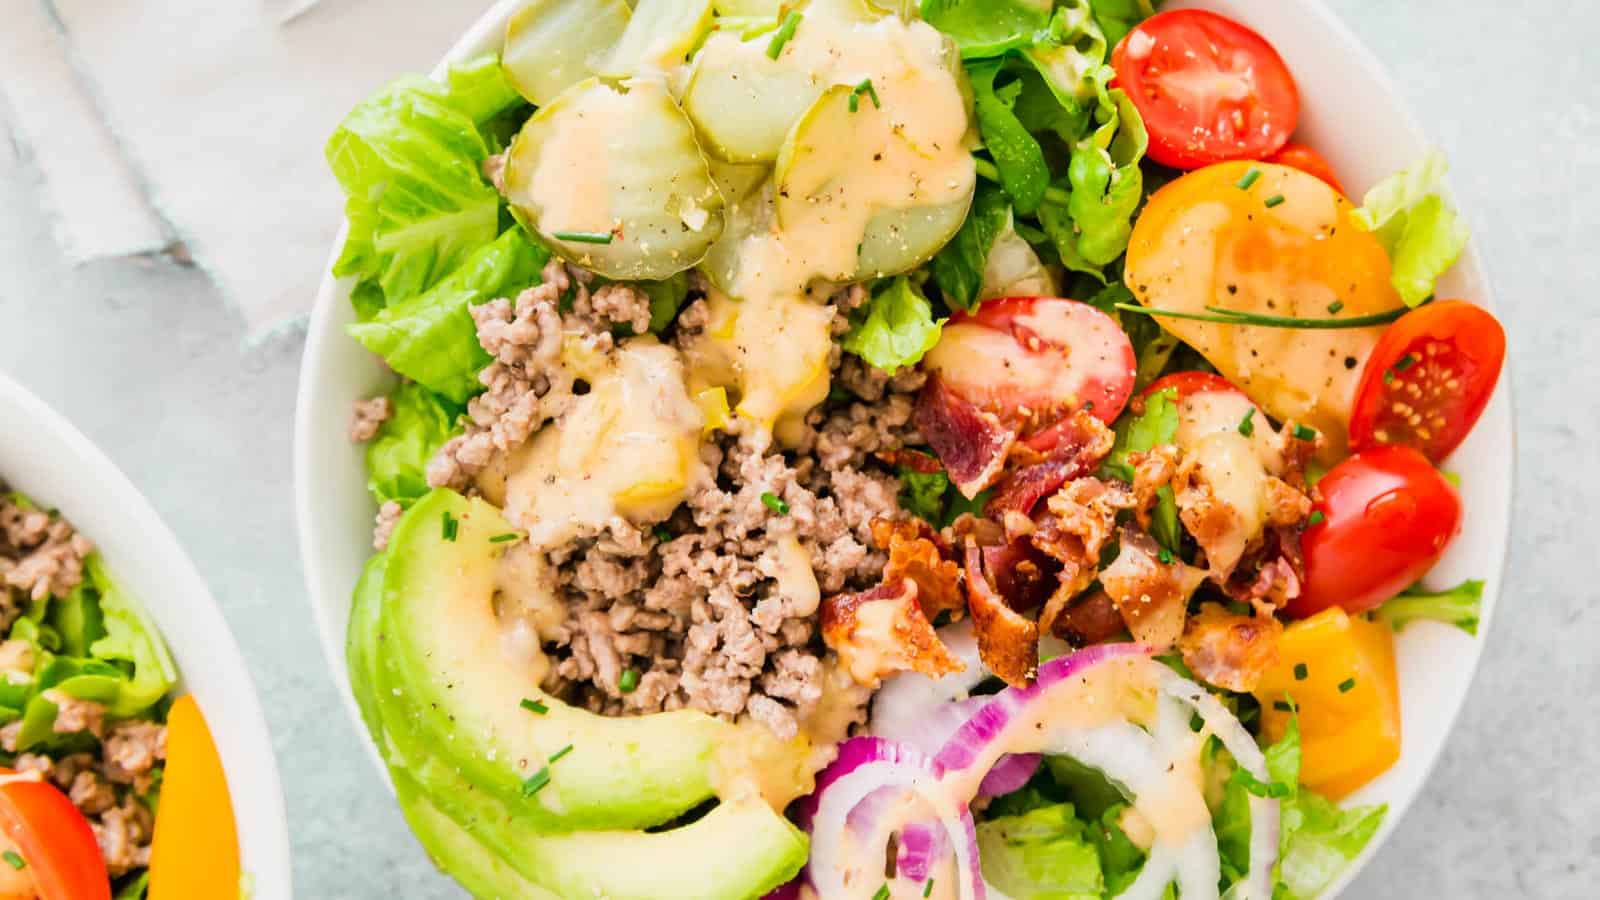 Burger bowl with bacon, lettuce, tomato, onion, avocado and special sauce.